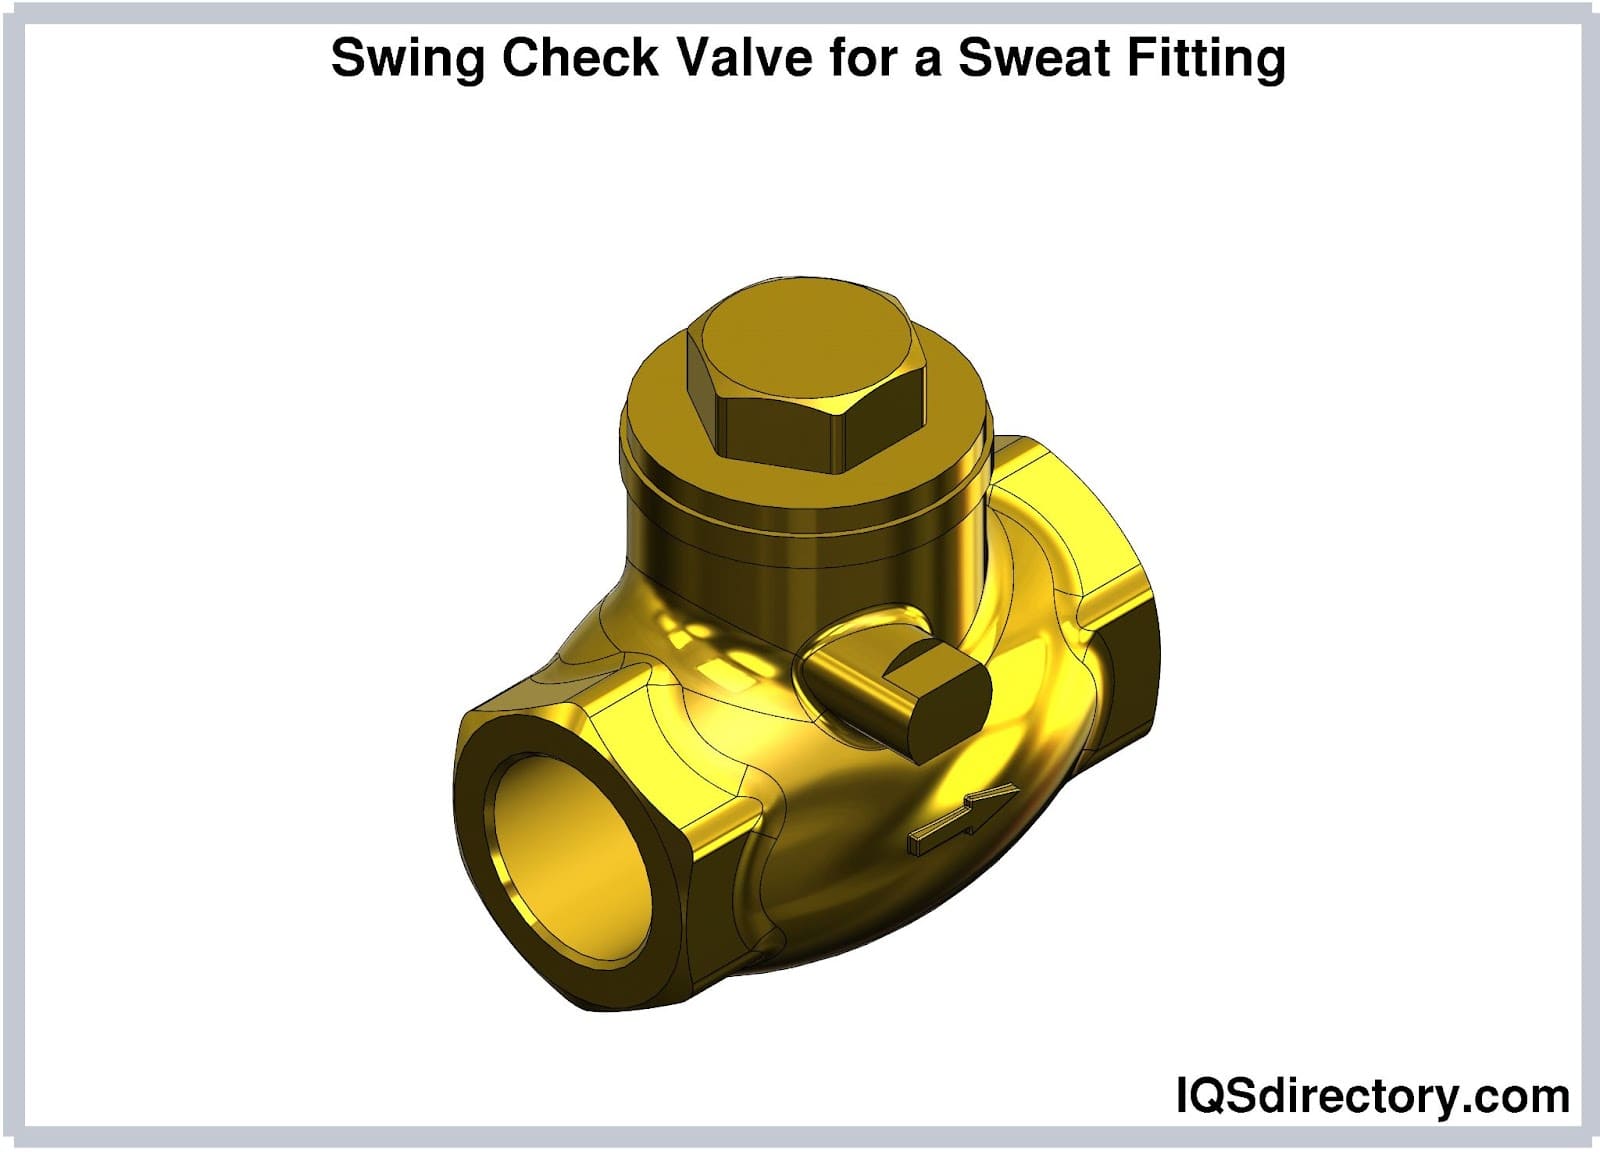 Swing Check Valve for a Sweat Fitting